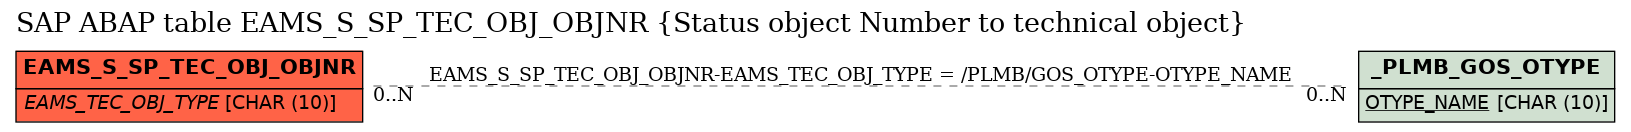 E-R Diagram for table EAMS_S_SP_TEC_OBJ_OBJNR (Status object Number to technical object)